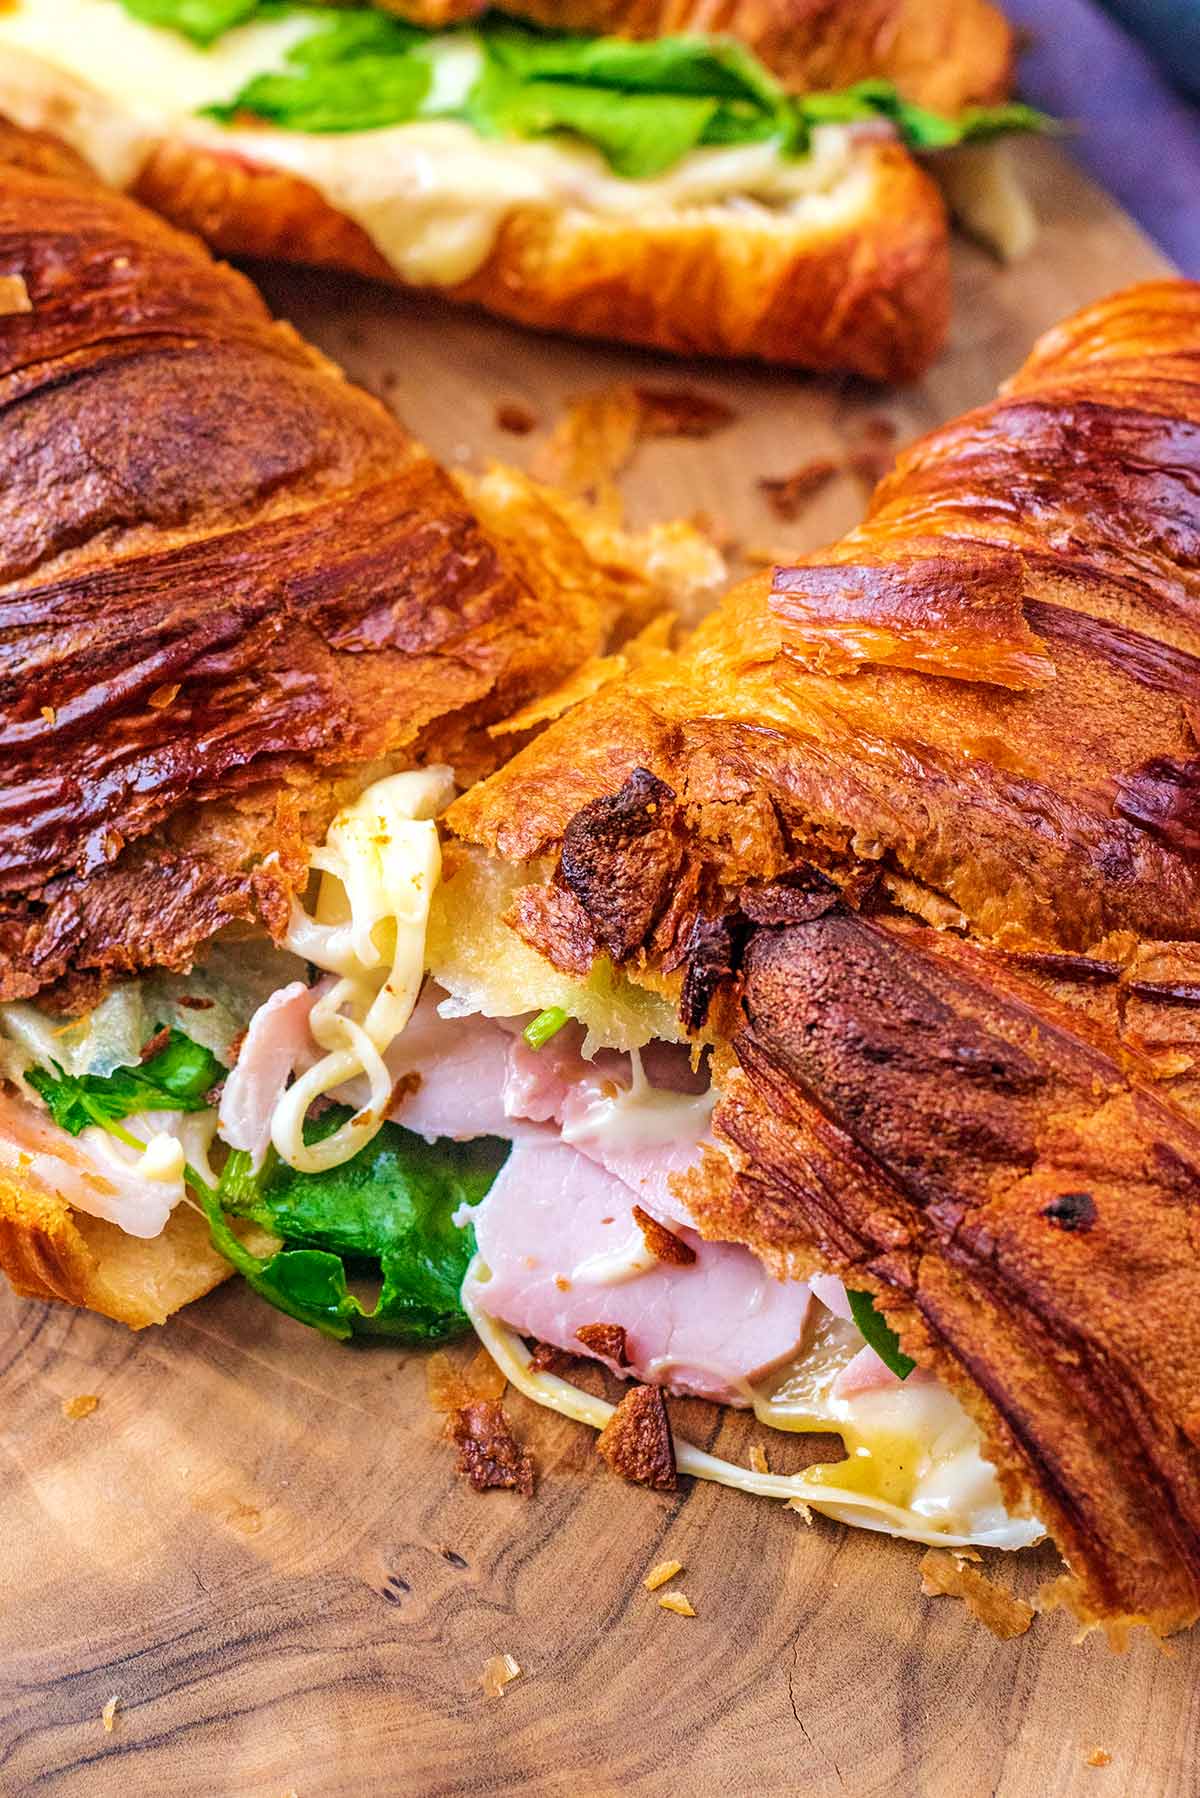 A stuffed croissant cut in half showing ham and cheese inside.